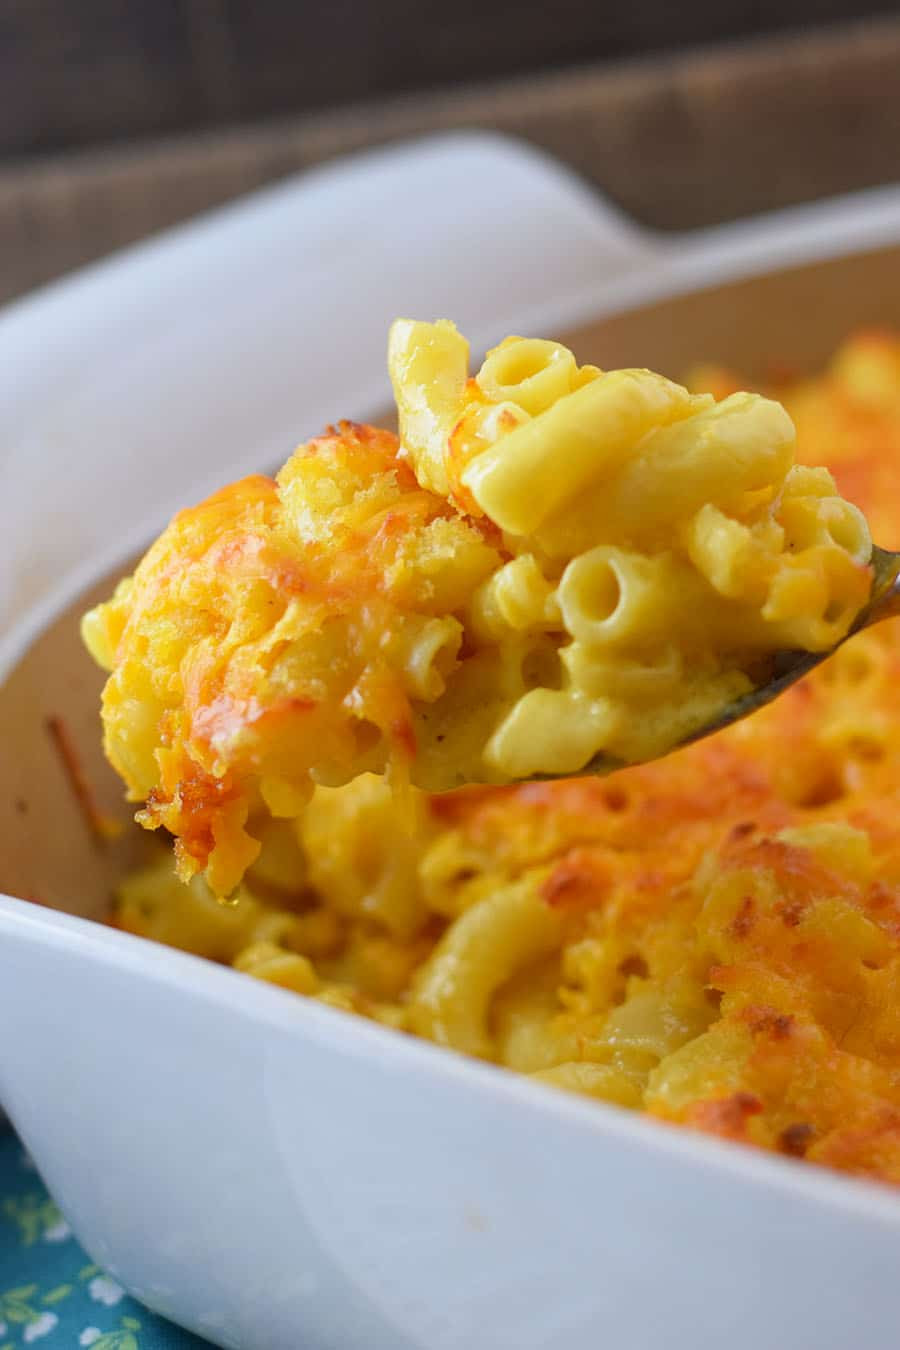 Baked Macaroni And Cheese With Heavy Cream
 Baked Macaroni and Cheese